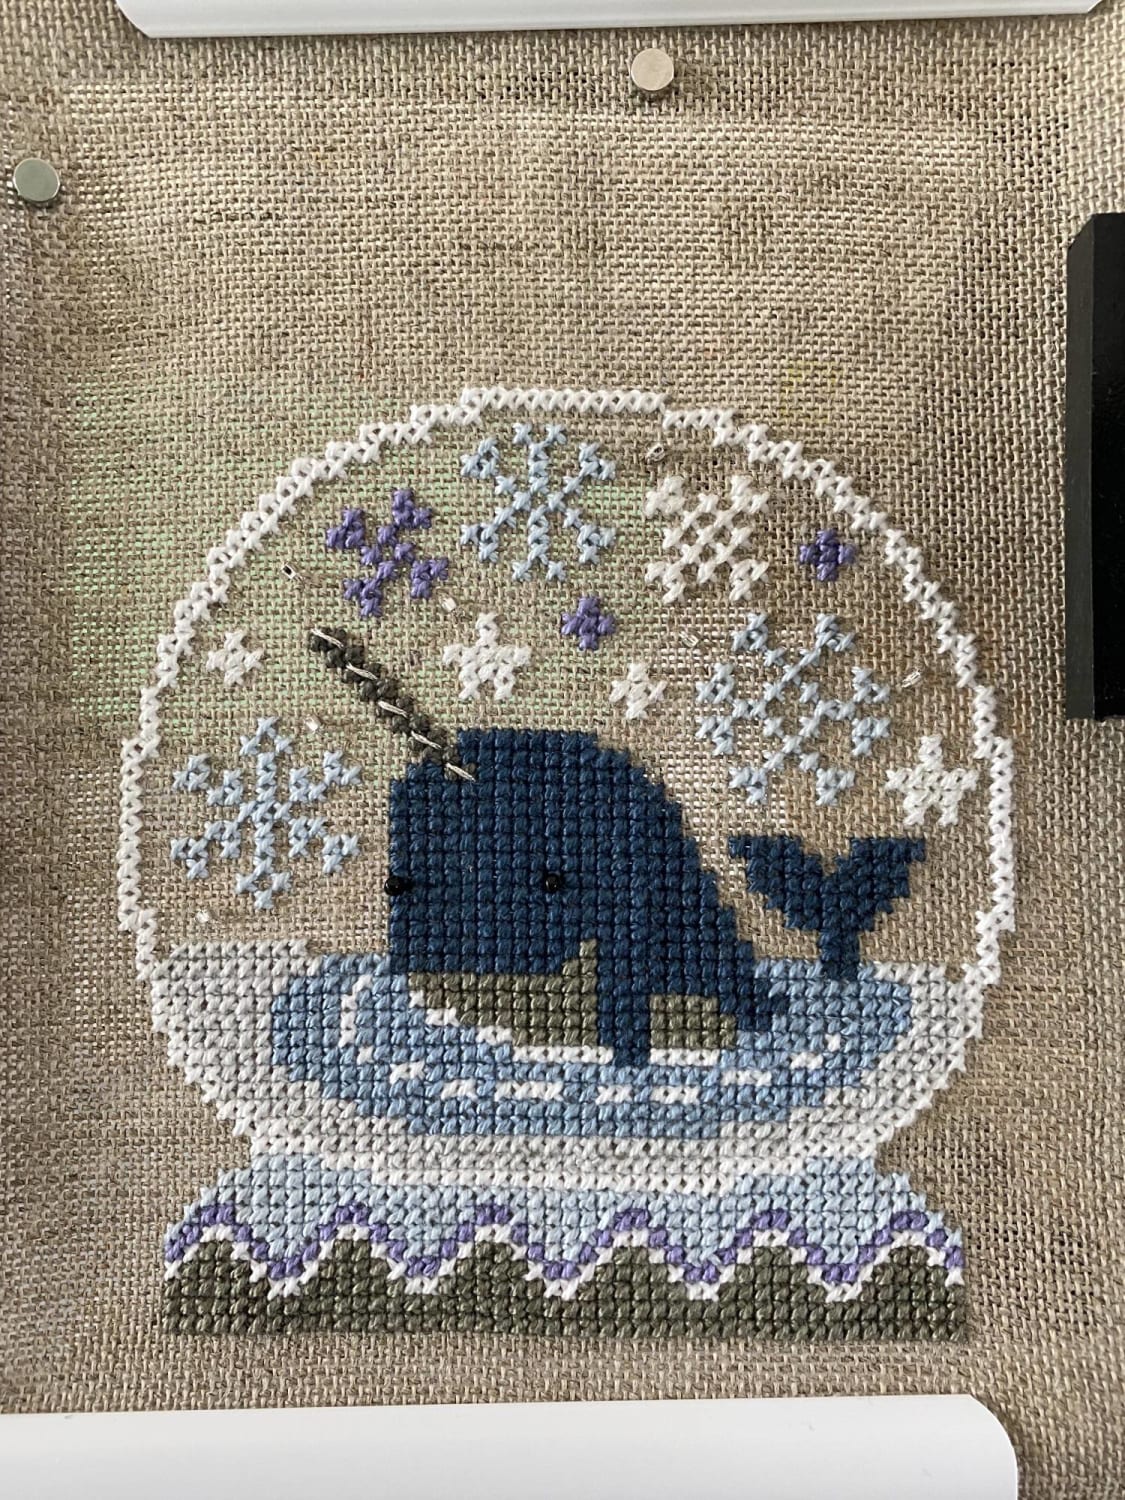 [fo] Narwhal Snow Globe kit by Bent Creek